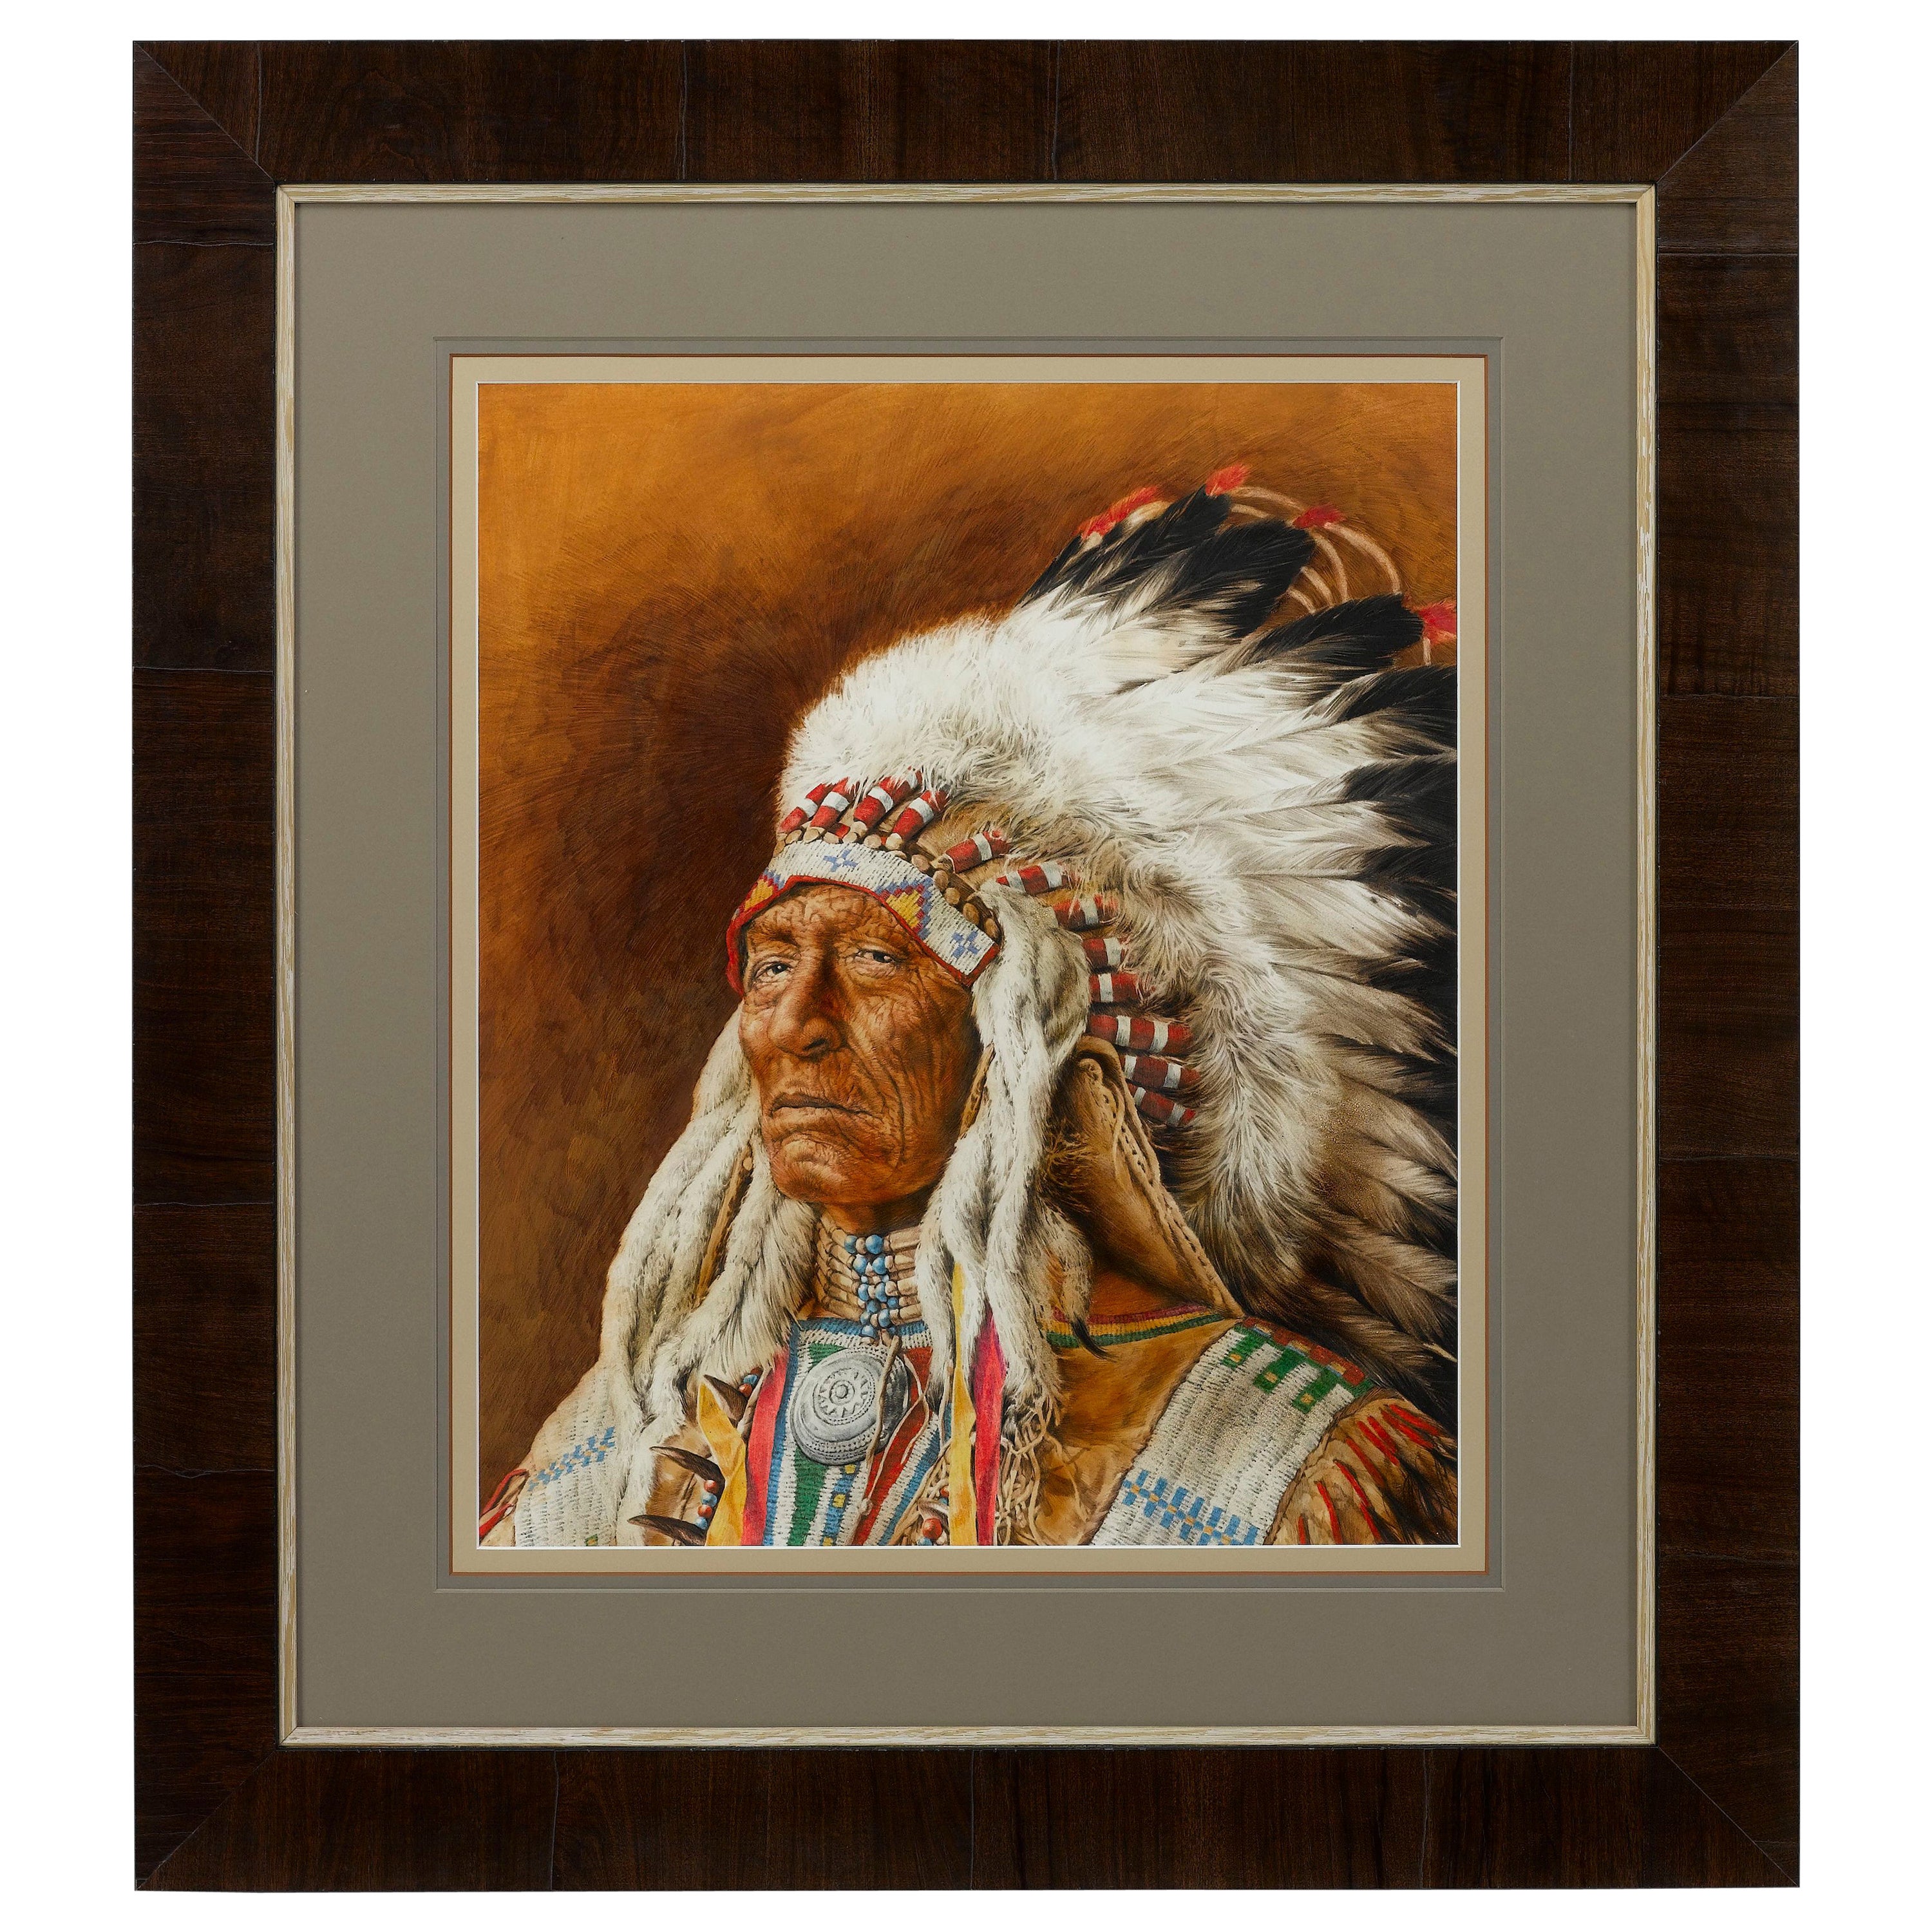 "Legends of the West-Indian Chief" by Chris Calle, Mixed Media Painting